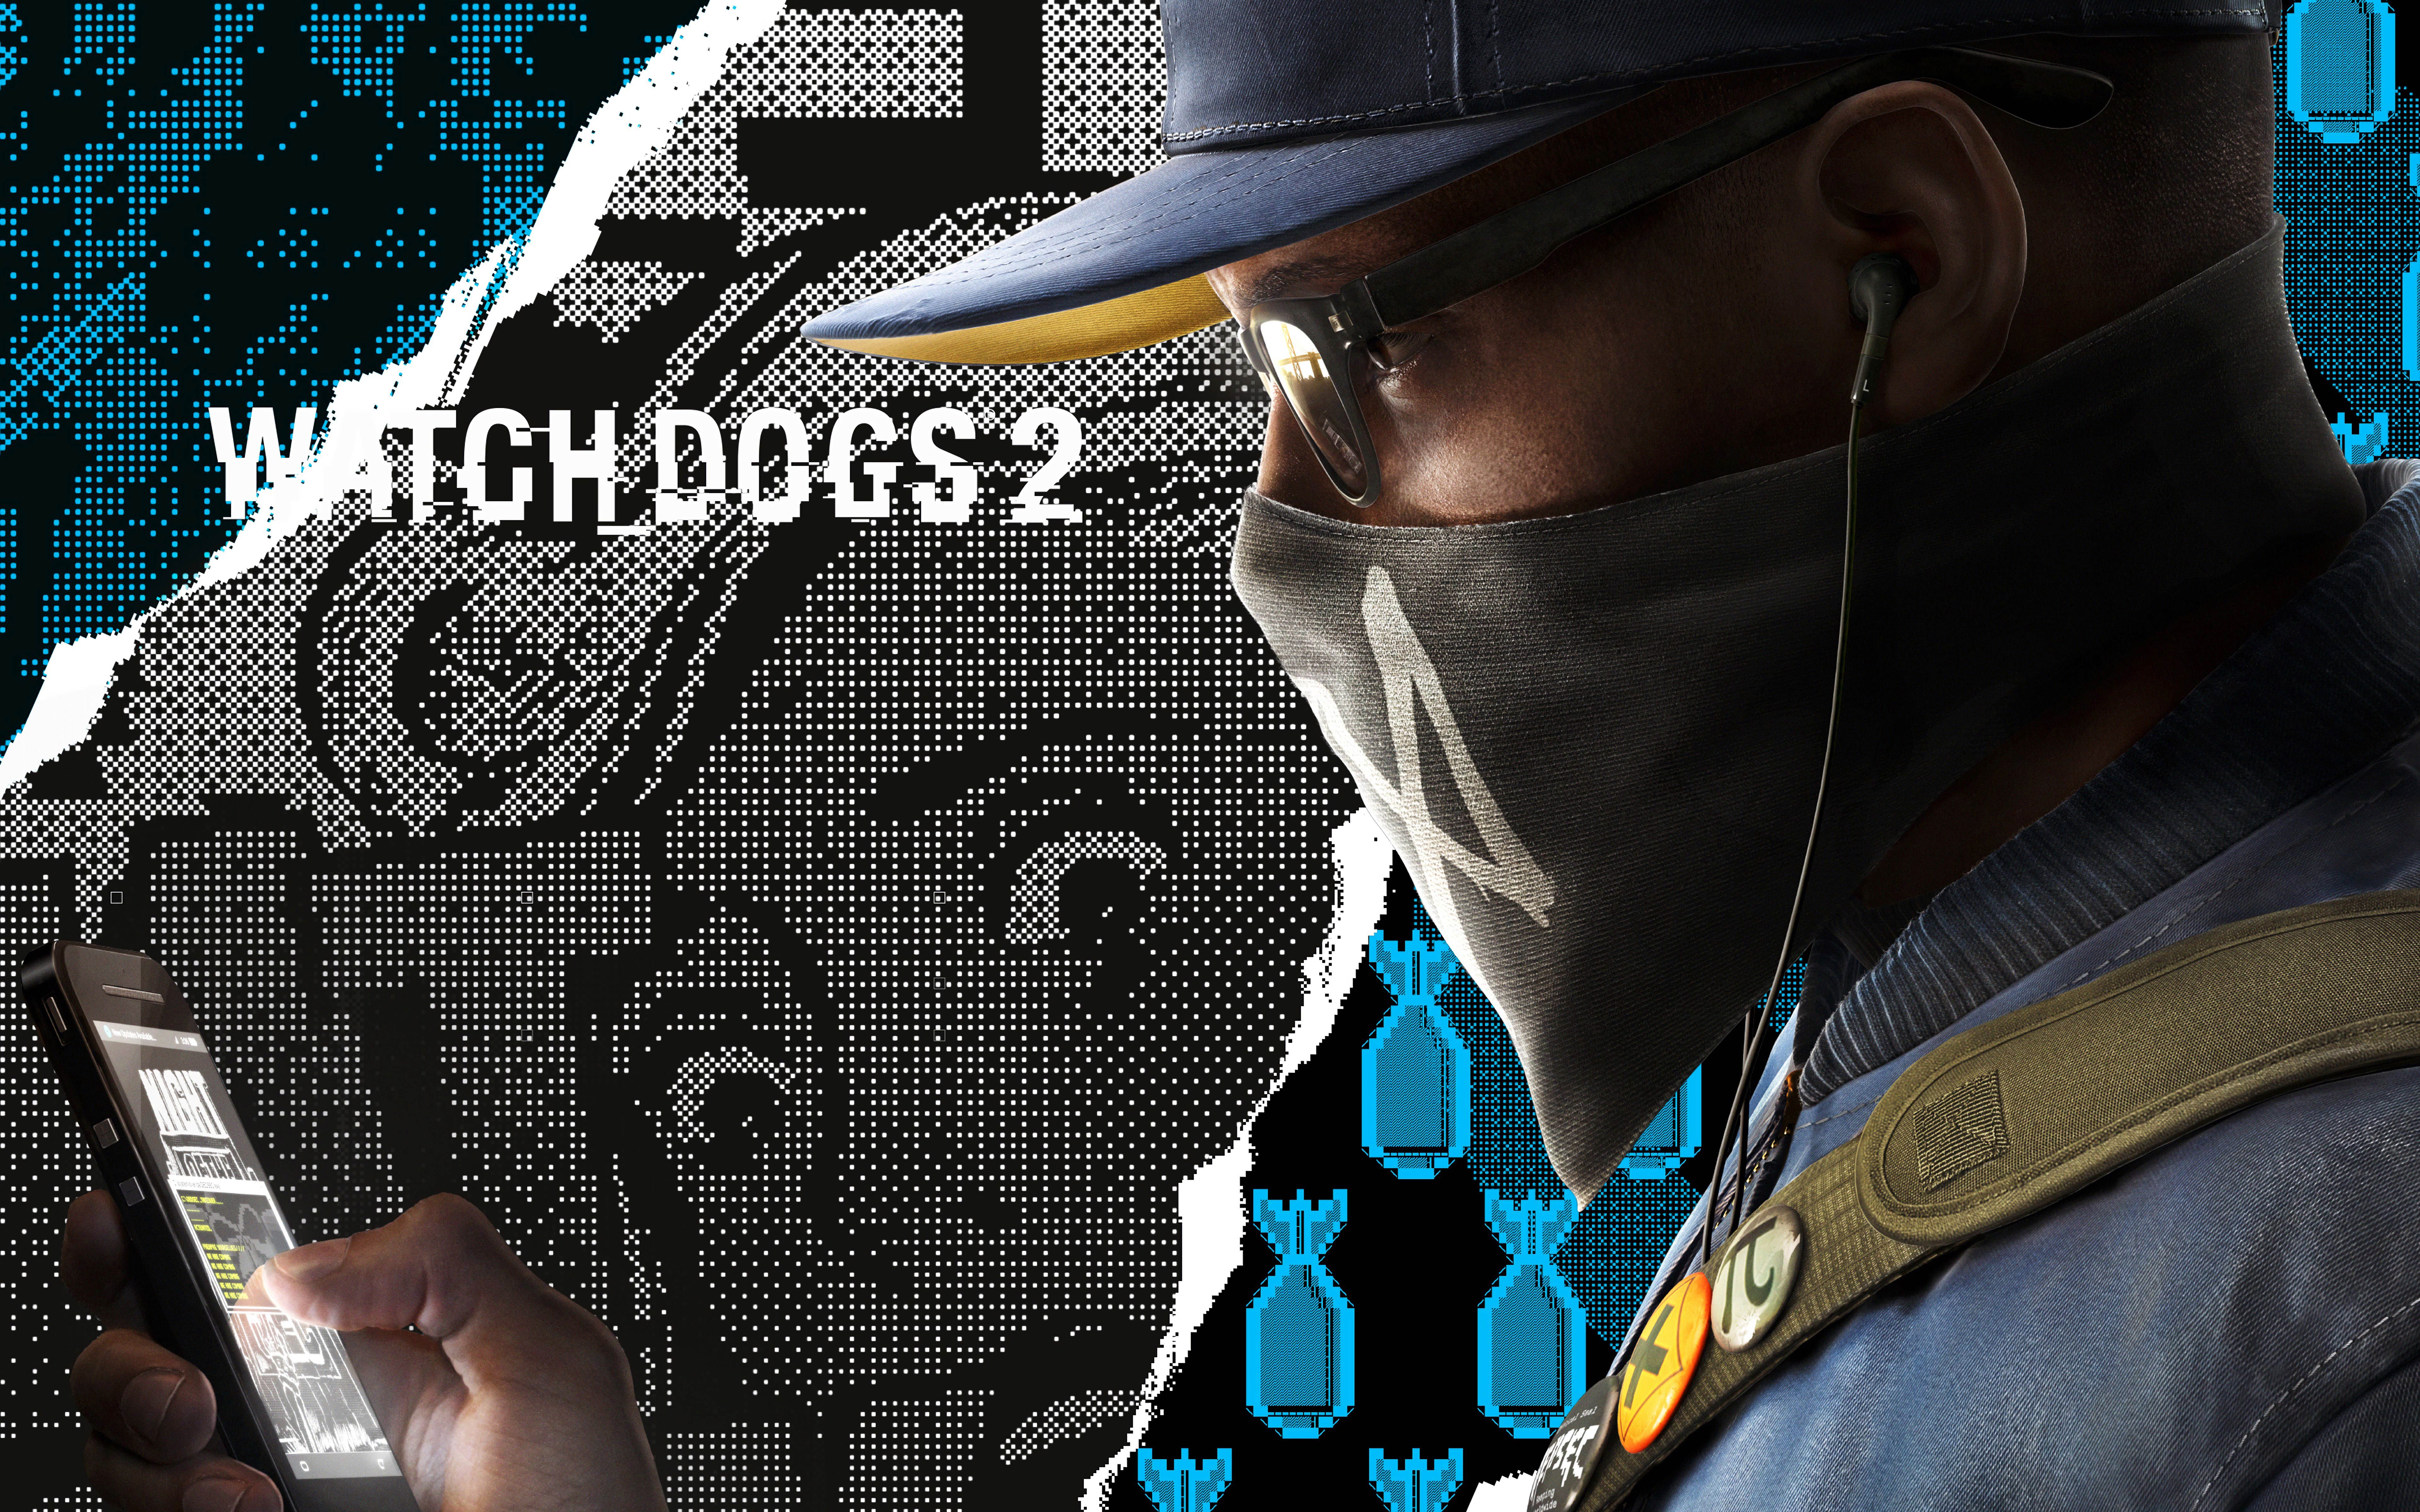  Watch Dogs  2 8k HD  Games  4k Wallpapers  Images 